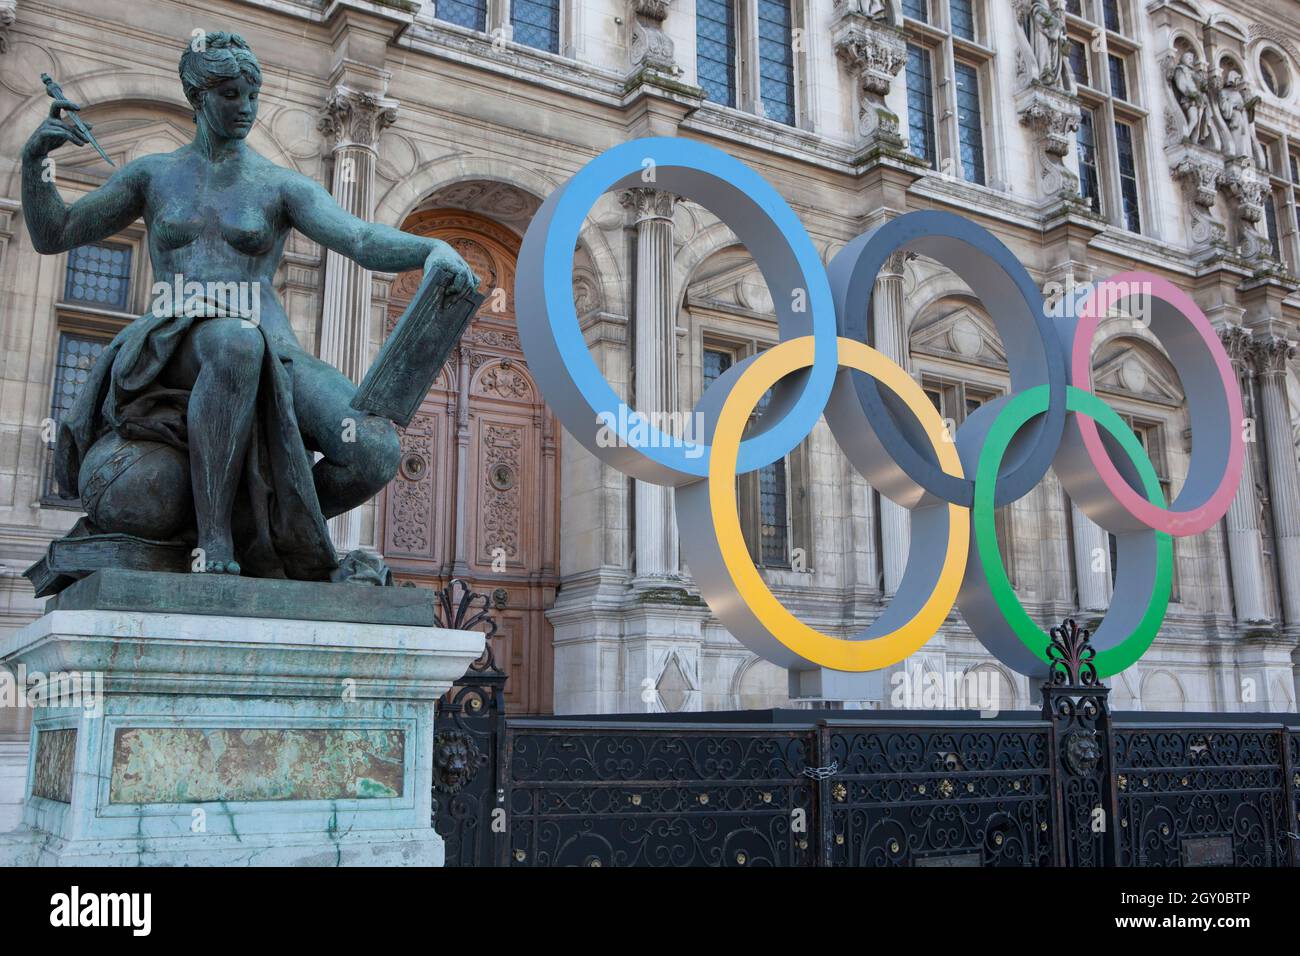 Paris, France, 4 October 2021: outside the Hotel de Ville in central Paris the Olympic rings are on display in celebration of the city being host to the Summer 2024 Olympic Games. Anna Watson/Alamy Live News Stock Photo